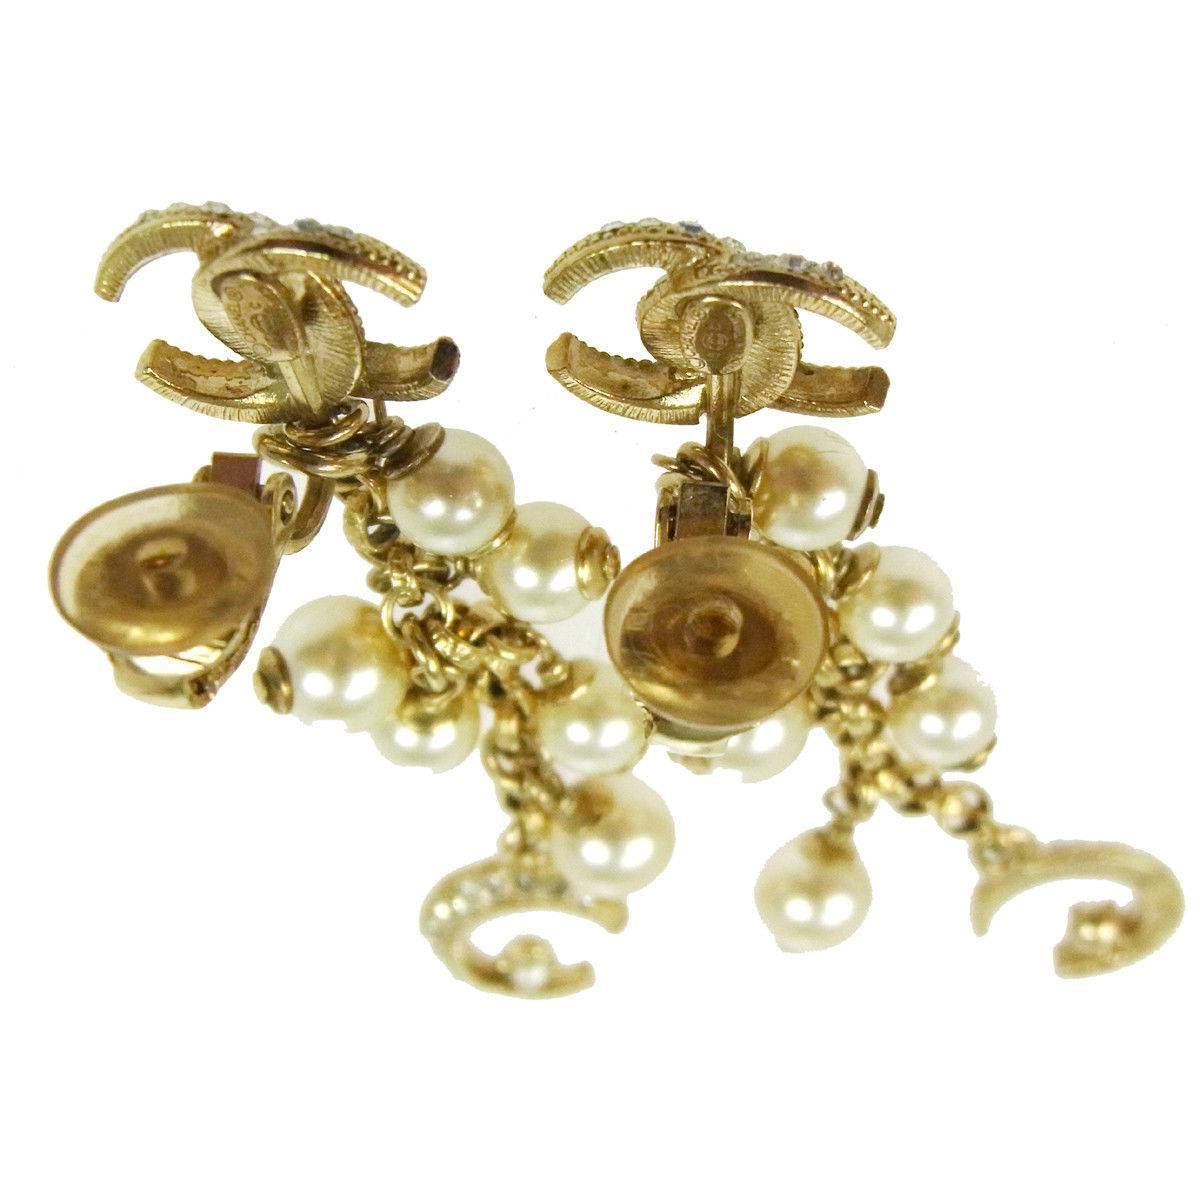 Chanel Like New Gold Faux Pearl Charm Long Dangle Drop Evening Earrings in Box available at Newfound 

Metal
Gold tone
Faux pearl
Clip on closure
Made in France
Width 0.50"
Drop 2.25"
Includes original Chanel box